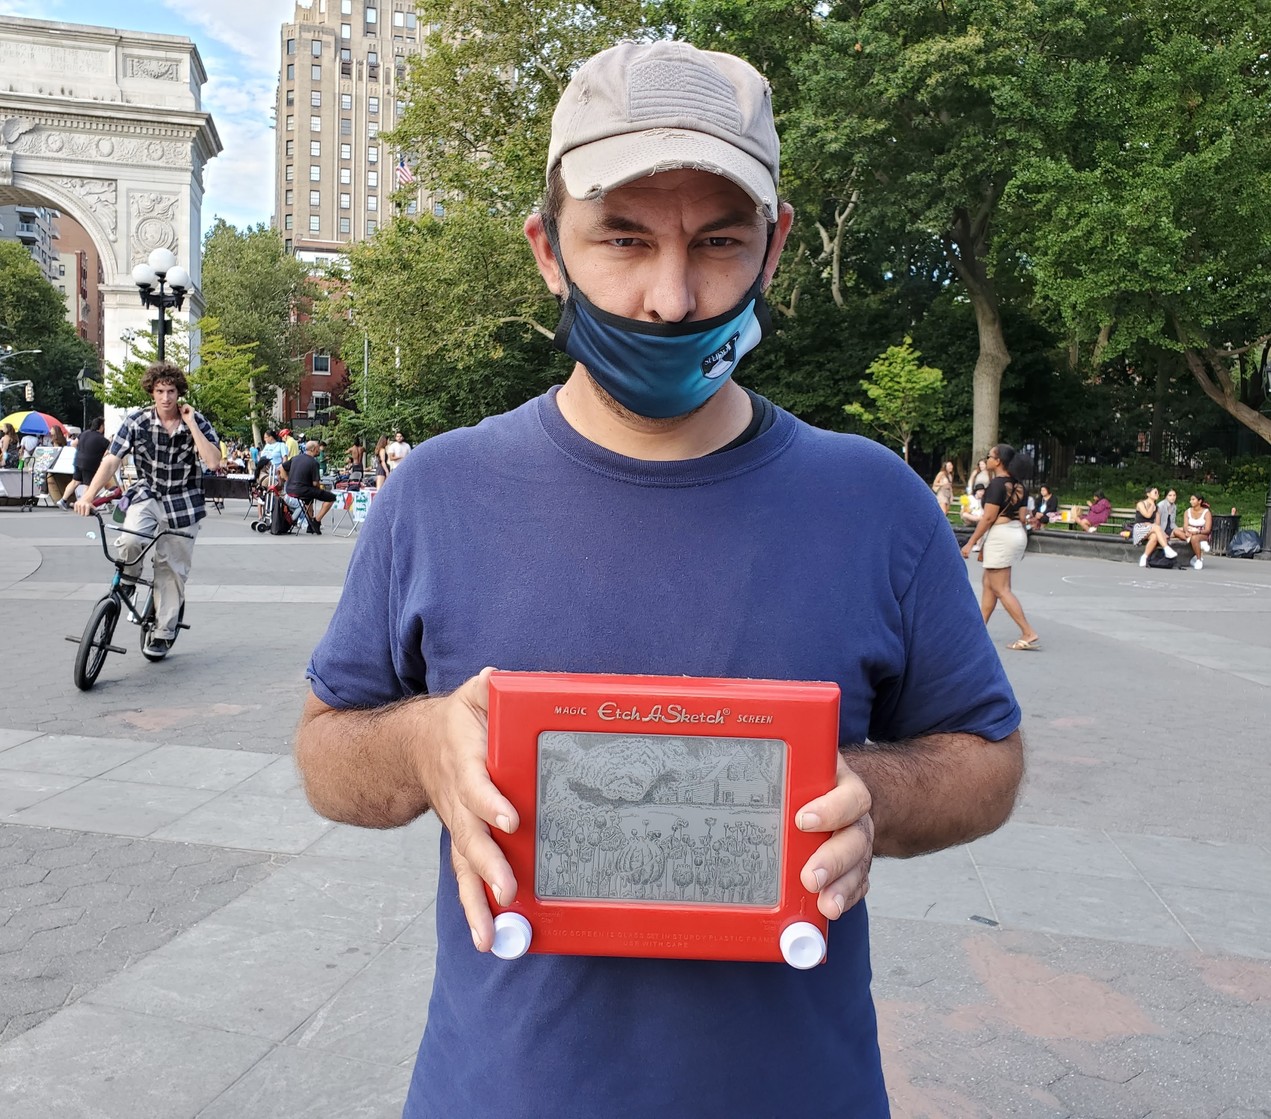 Etch A Sketch launches ad campaign